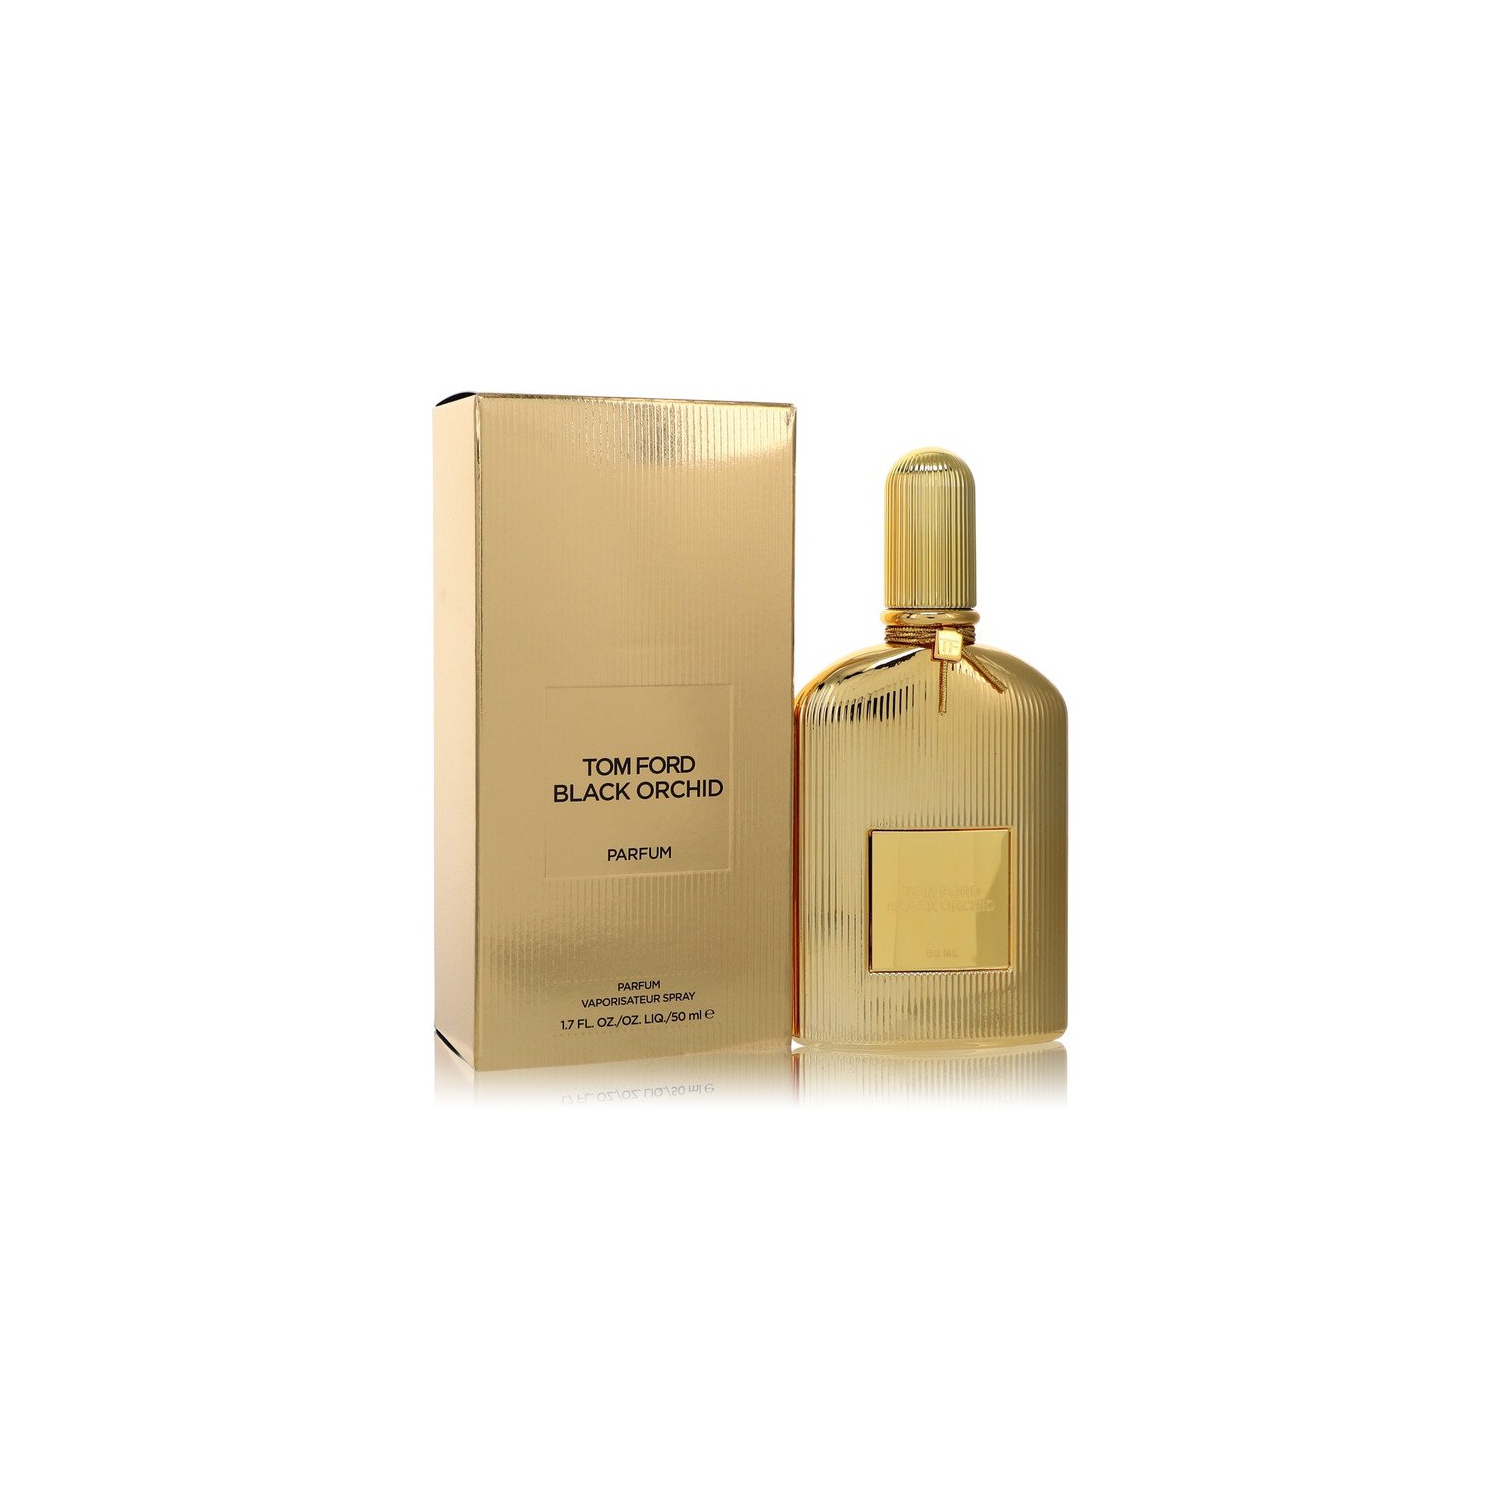 Black Orchid by Tom Ford Pure Perfume Spray (Women) 1.7 oz